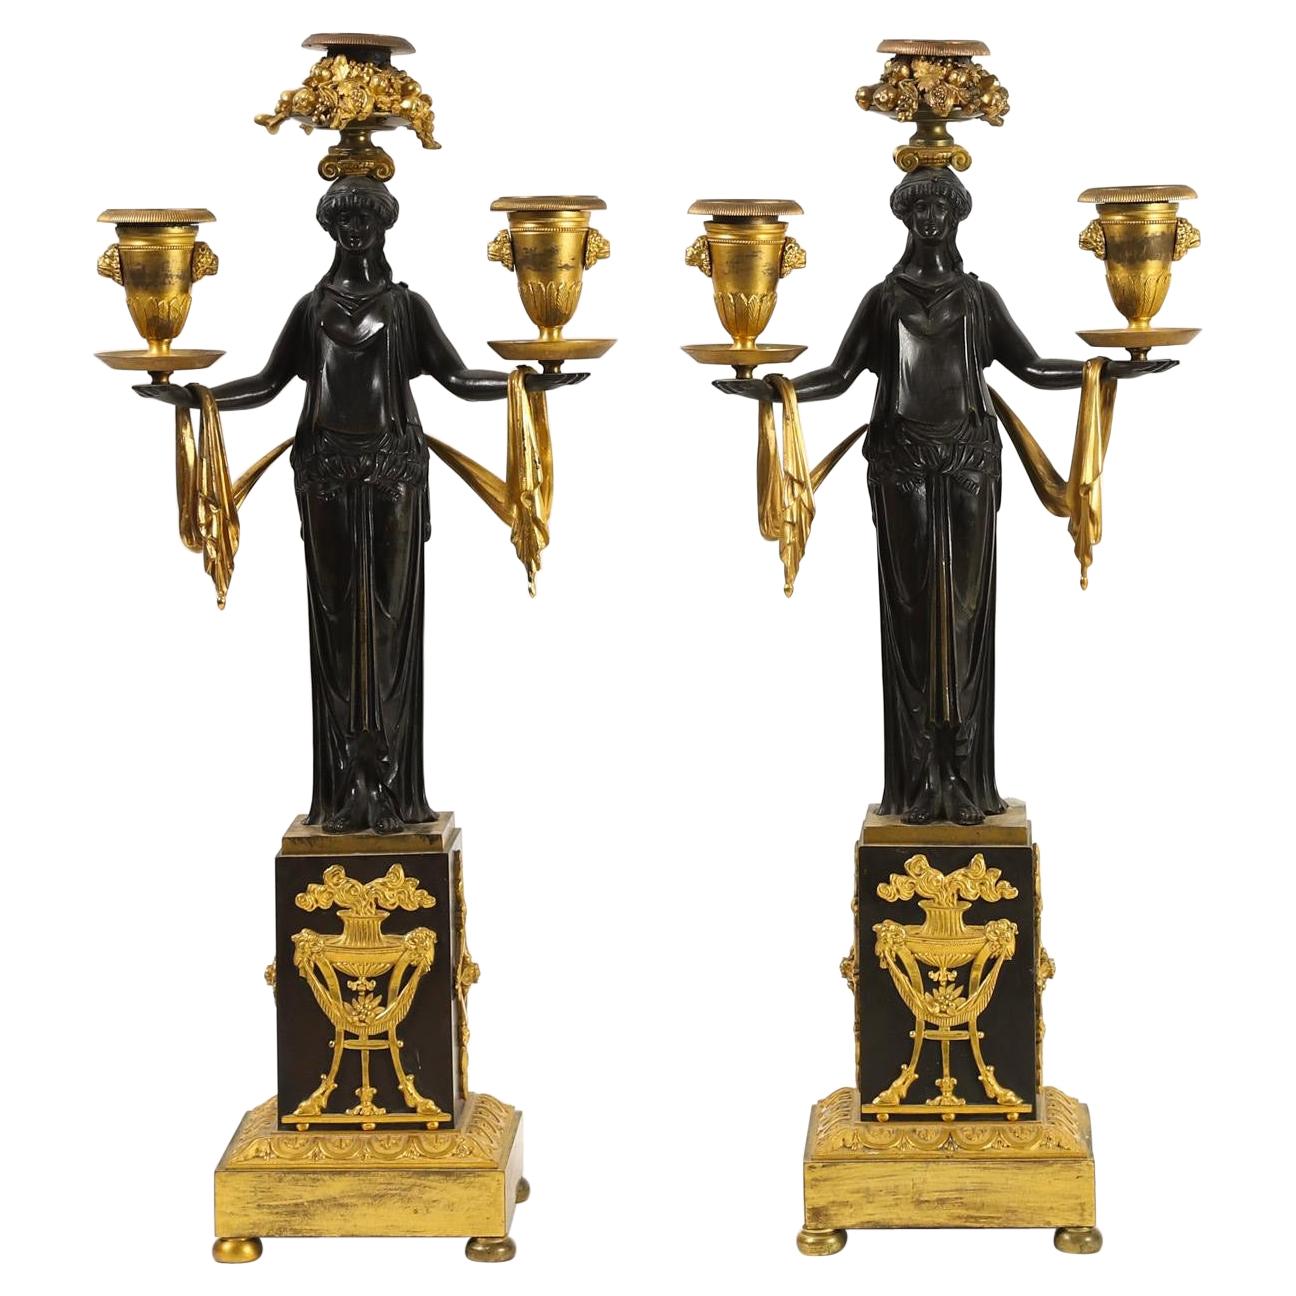 Very Fine Pair of French Empire Figural Three Light Candelabras